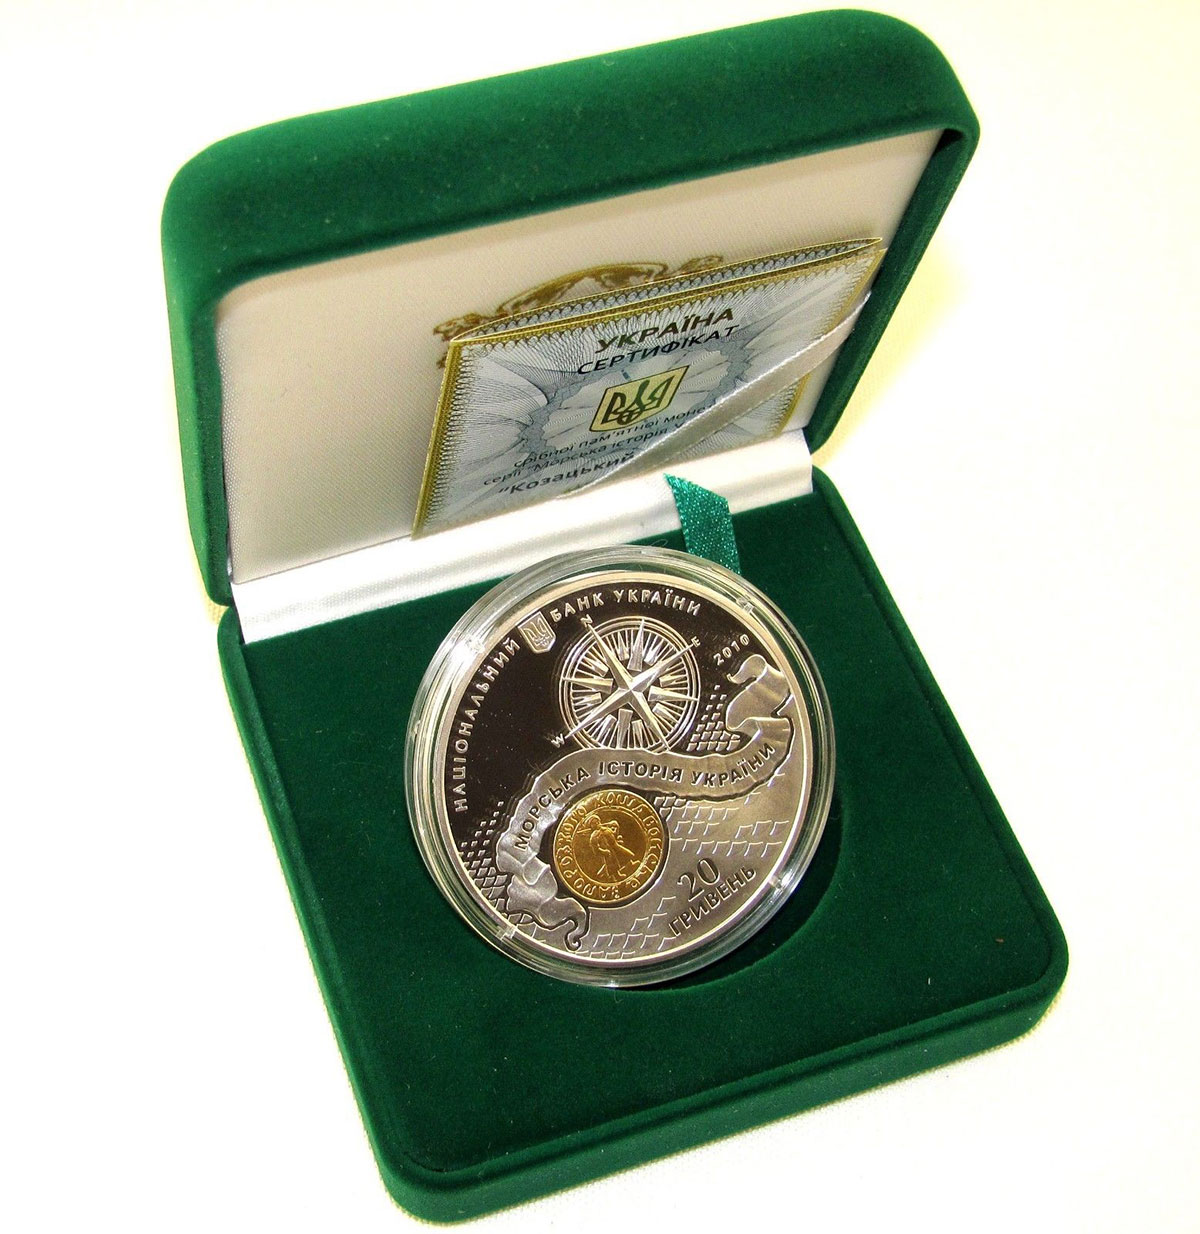 Ukraine 20 hryvnia Cossack Boat Ship Seagull silver proof coin 2010